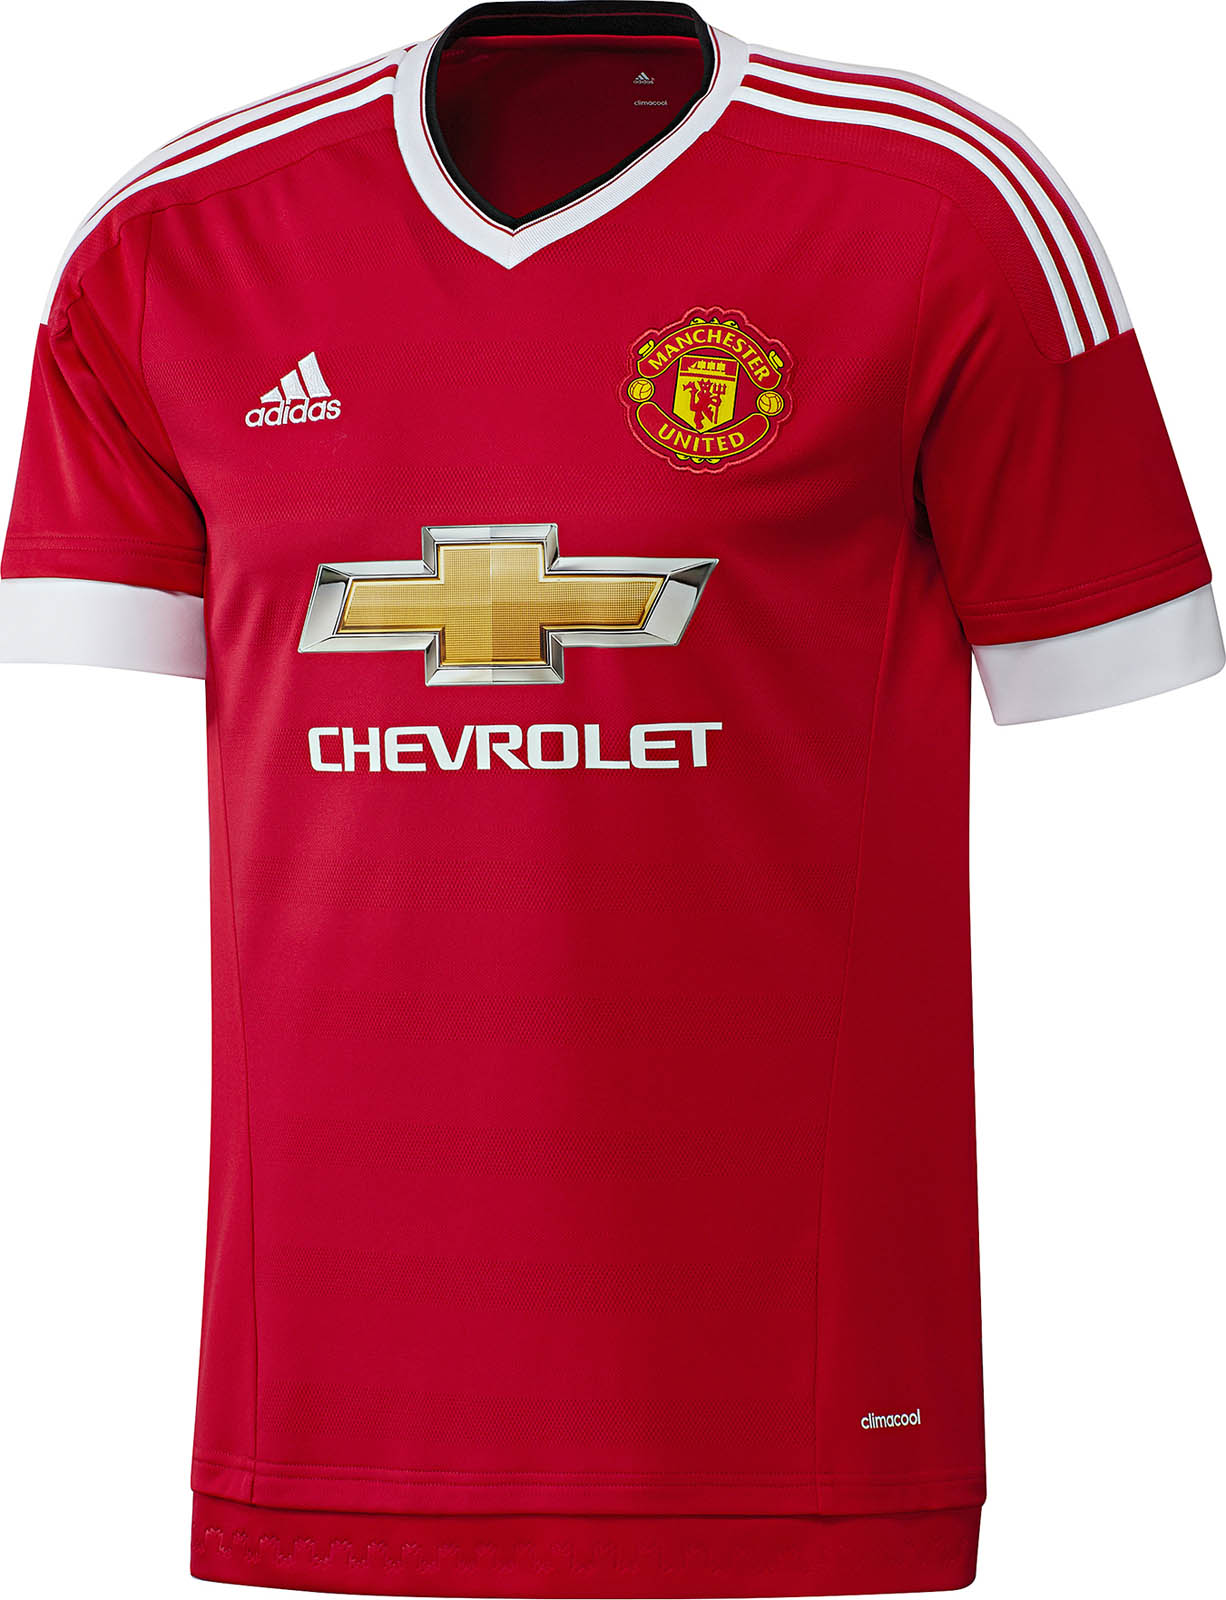 Adidas Manchester United 15-16 Kits Released - Footy Headlines